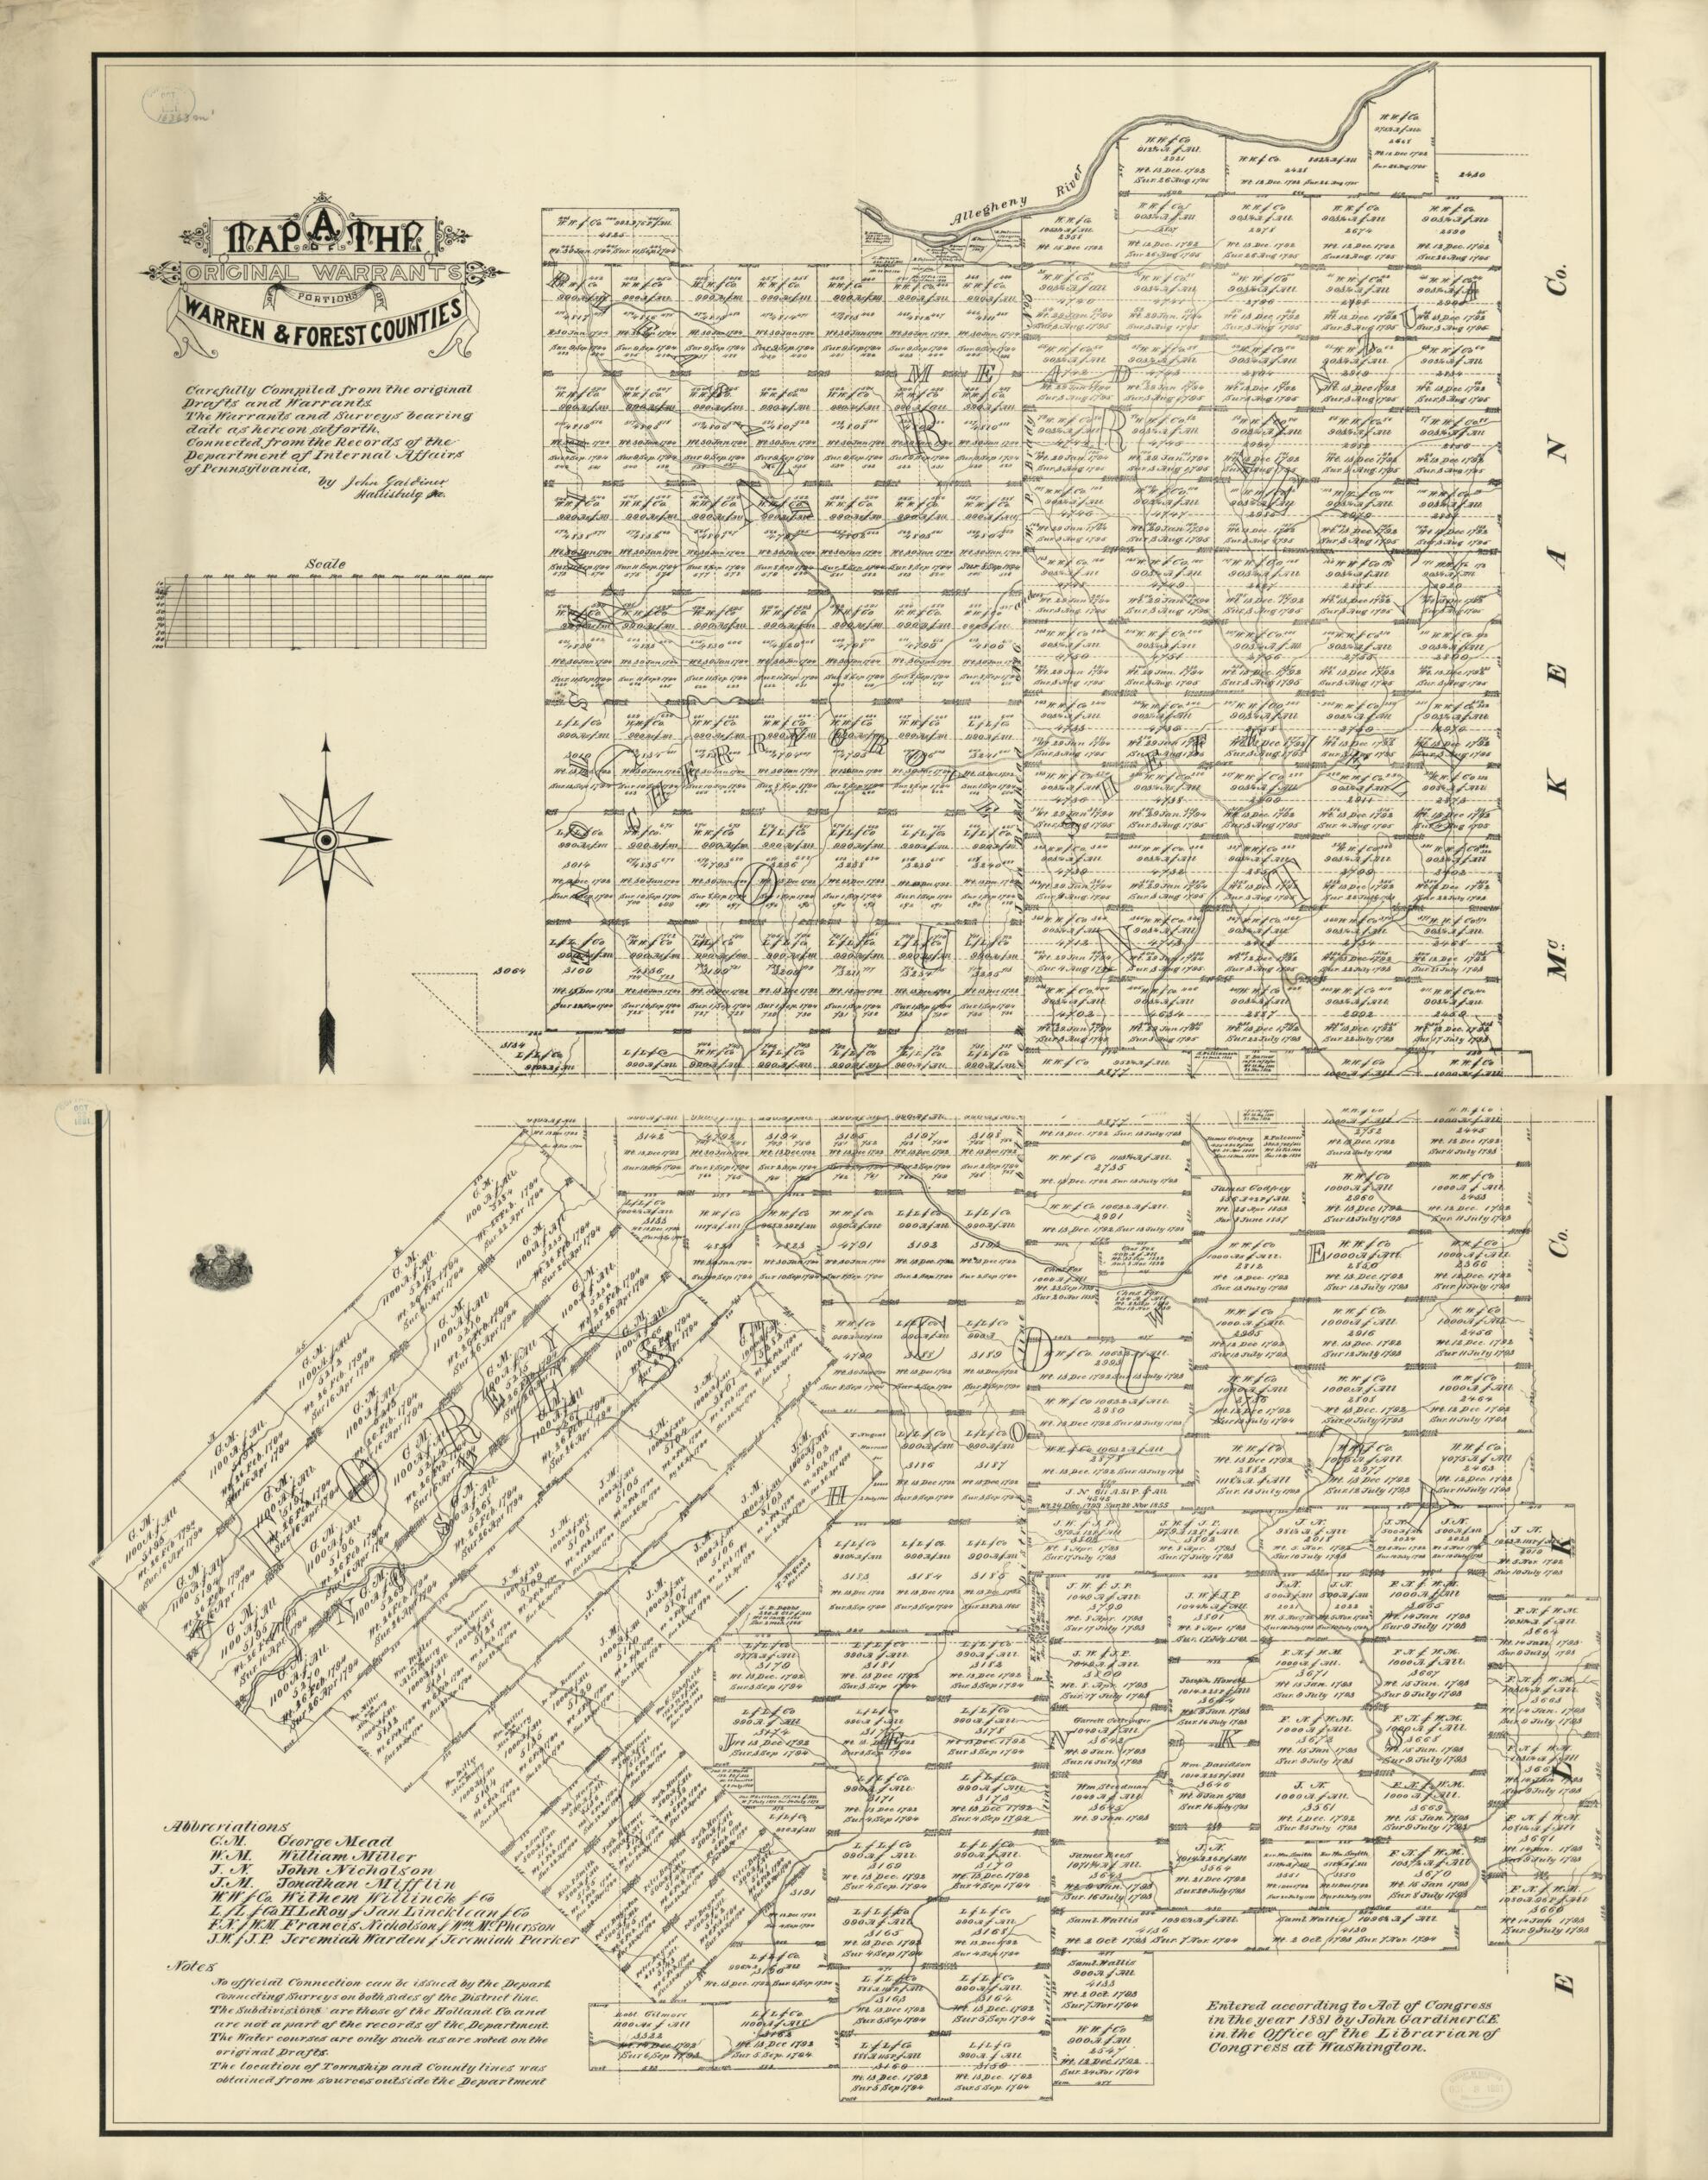 This old map of A Map of the Original Warrants of Portions of Warren &amp; Forest Counties : Carefully Compiled from the Original Drafts and Warrants.. of the Department of Internal Affairs of Pennsylvania from 1881 was created by John Gardiner,  Pennsylvani